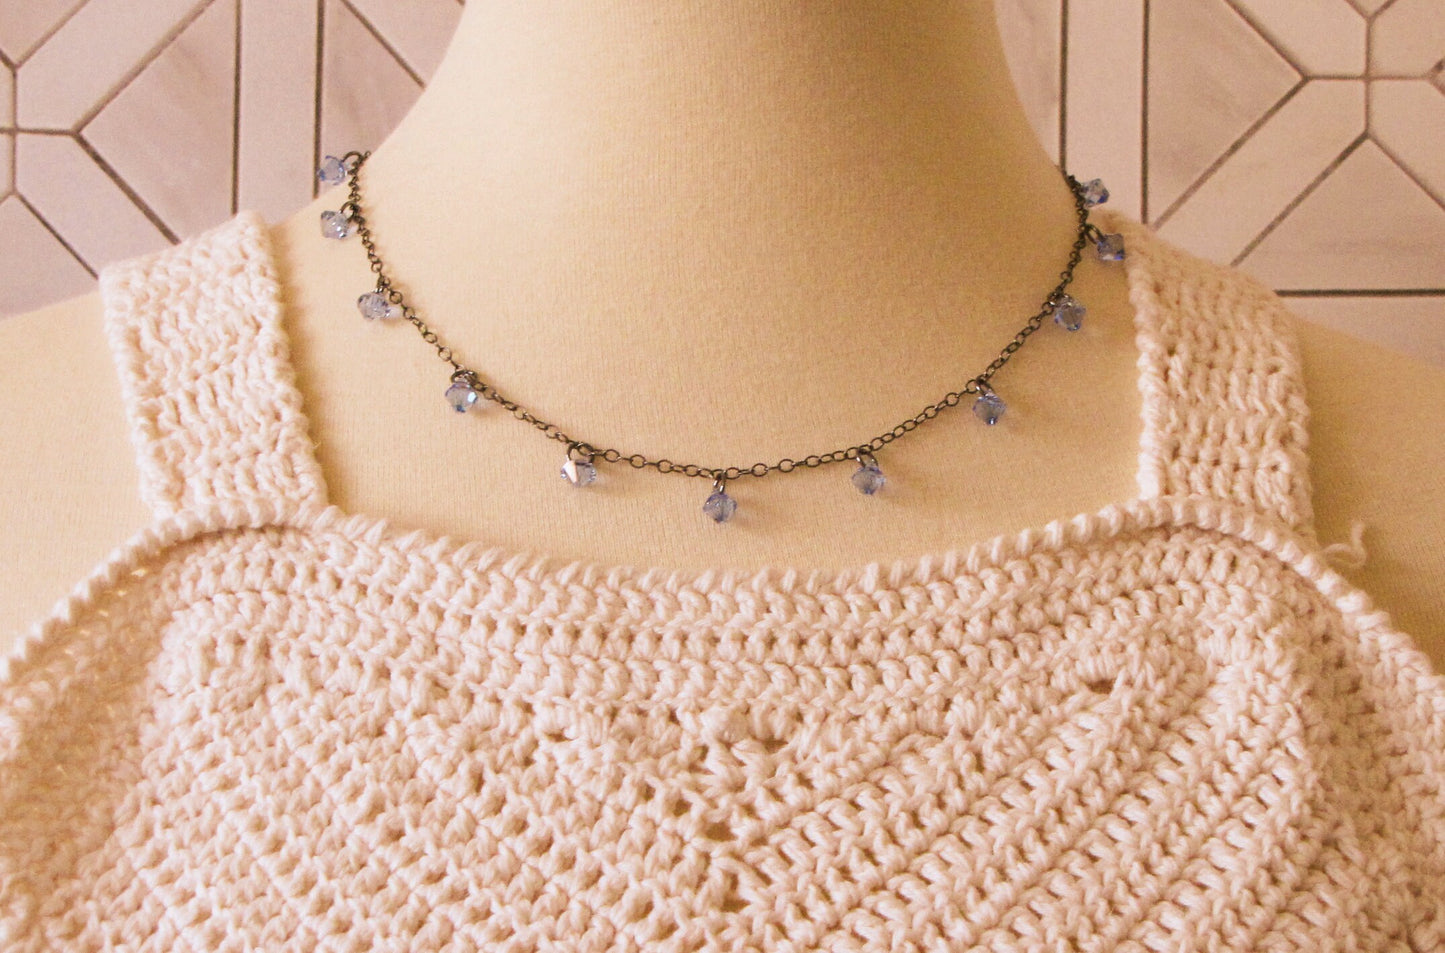 Oxidized chain tin cup necklace